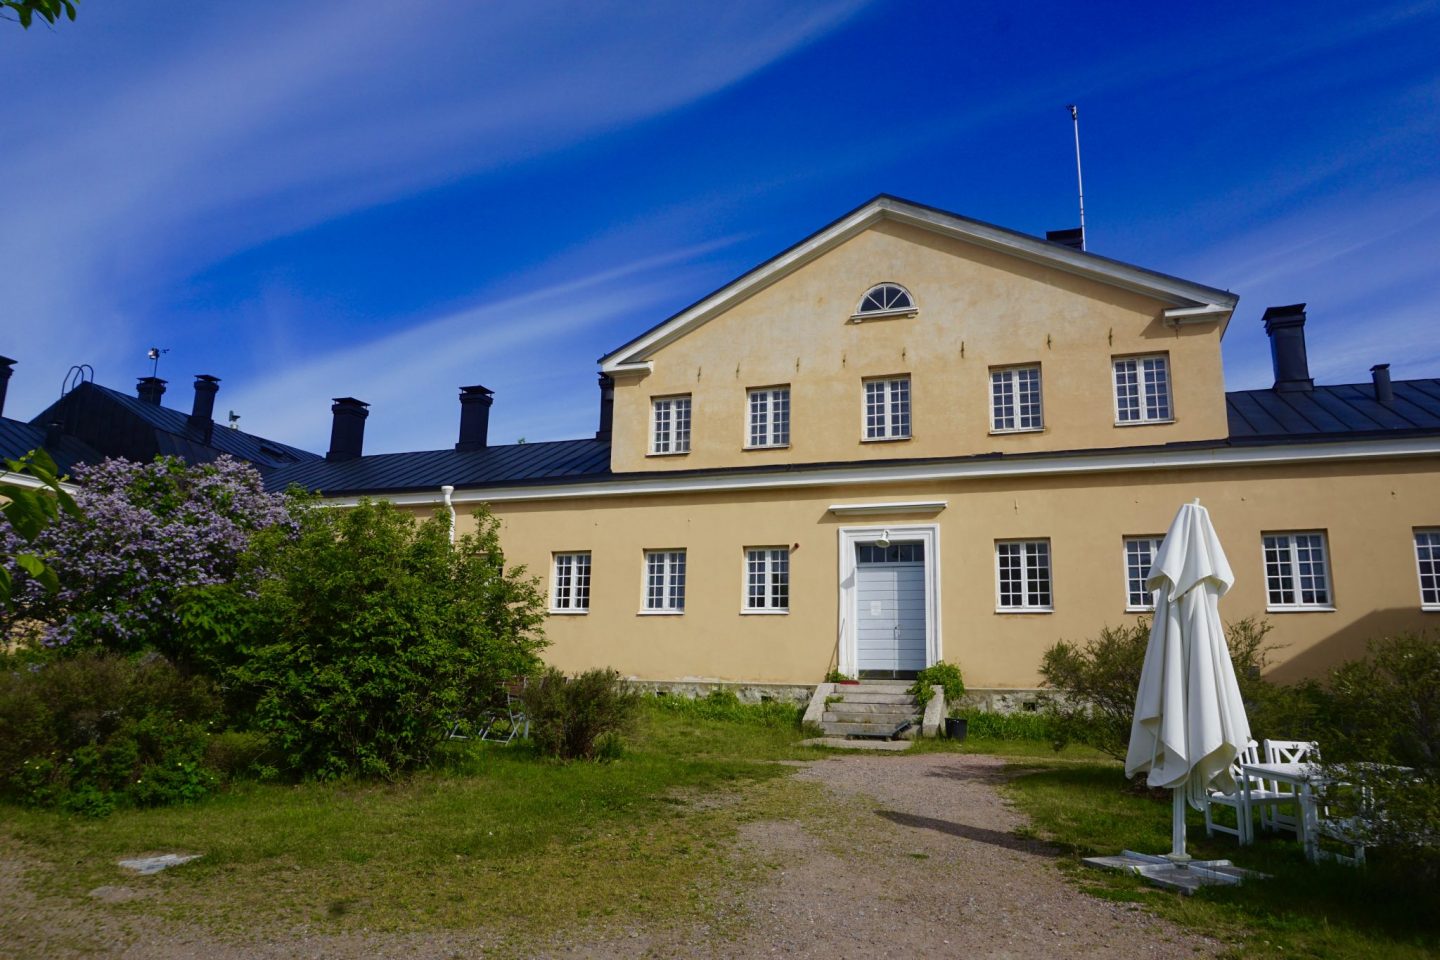 A Complete Guide To Visiting the Island of Seili – An Archipelago Gem With a Dark History